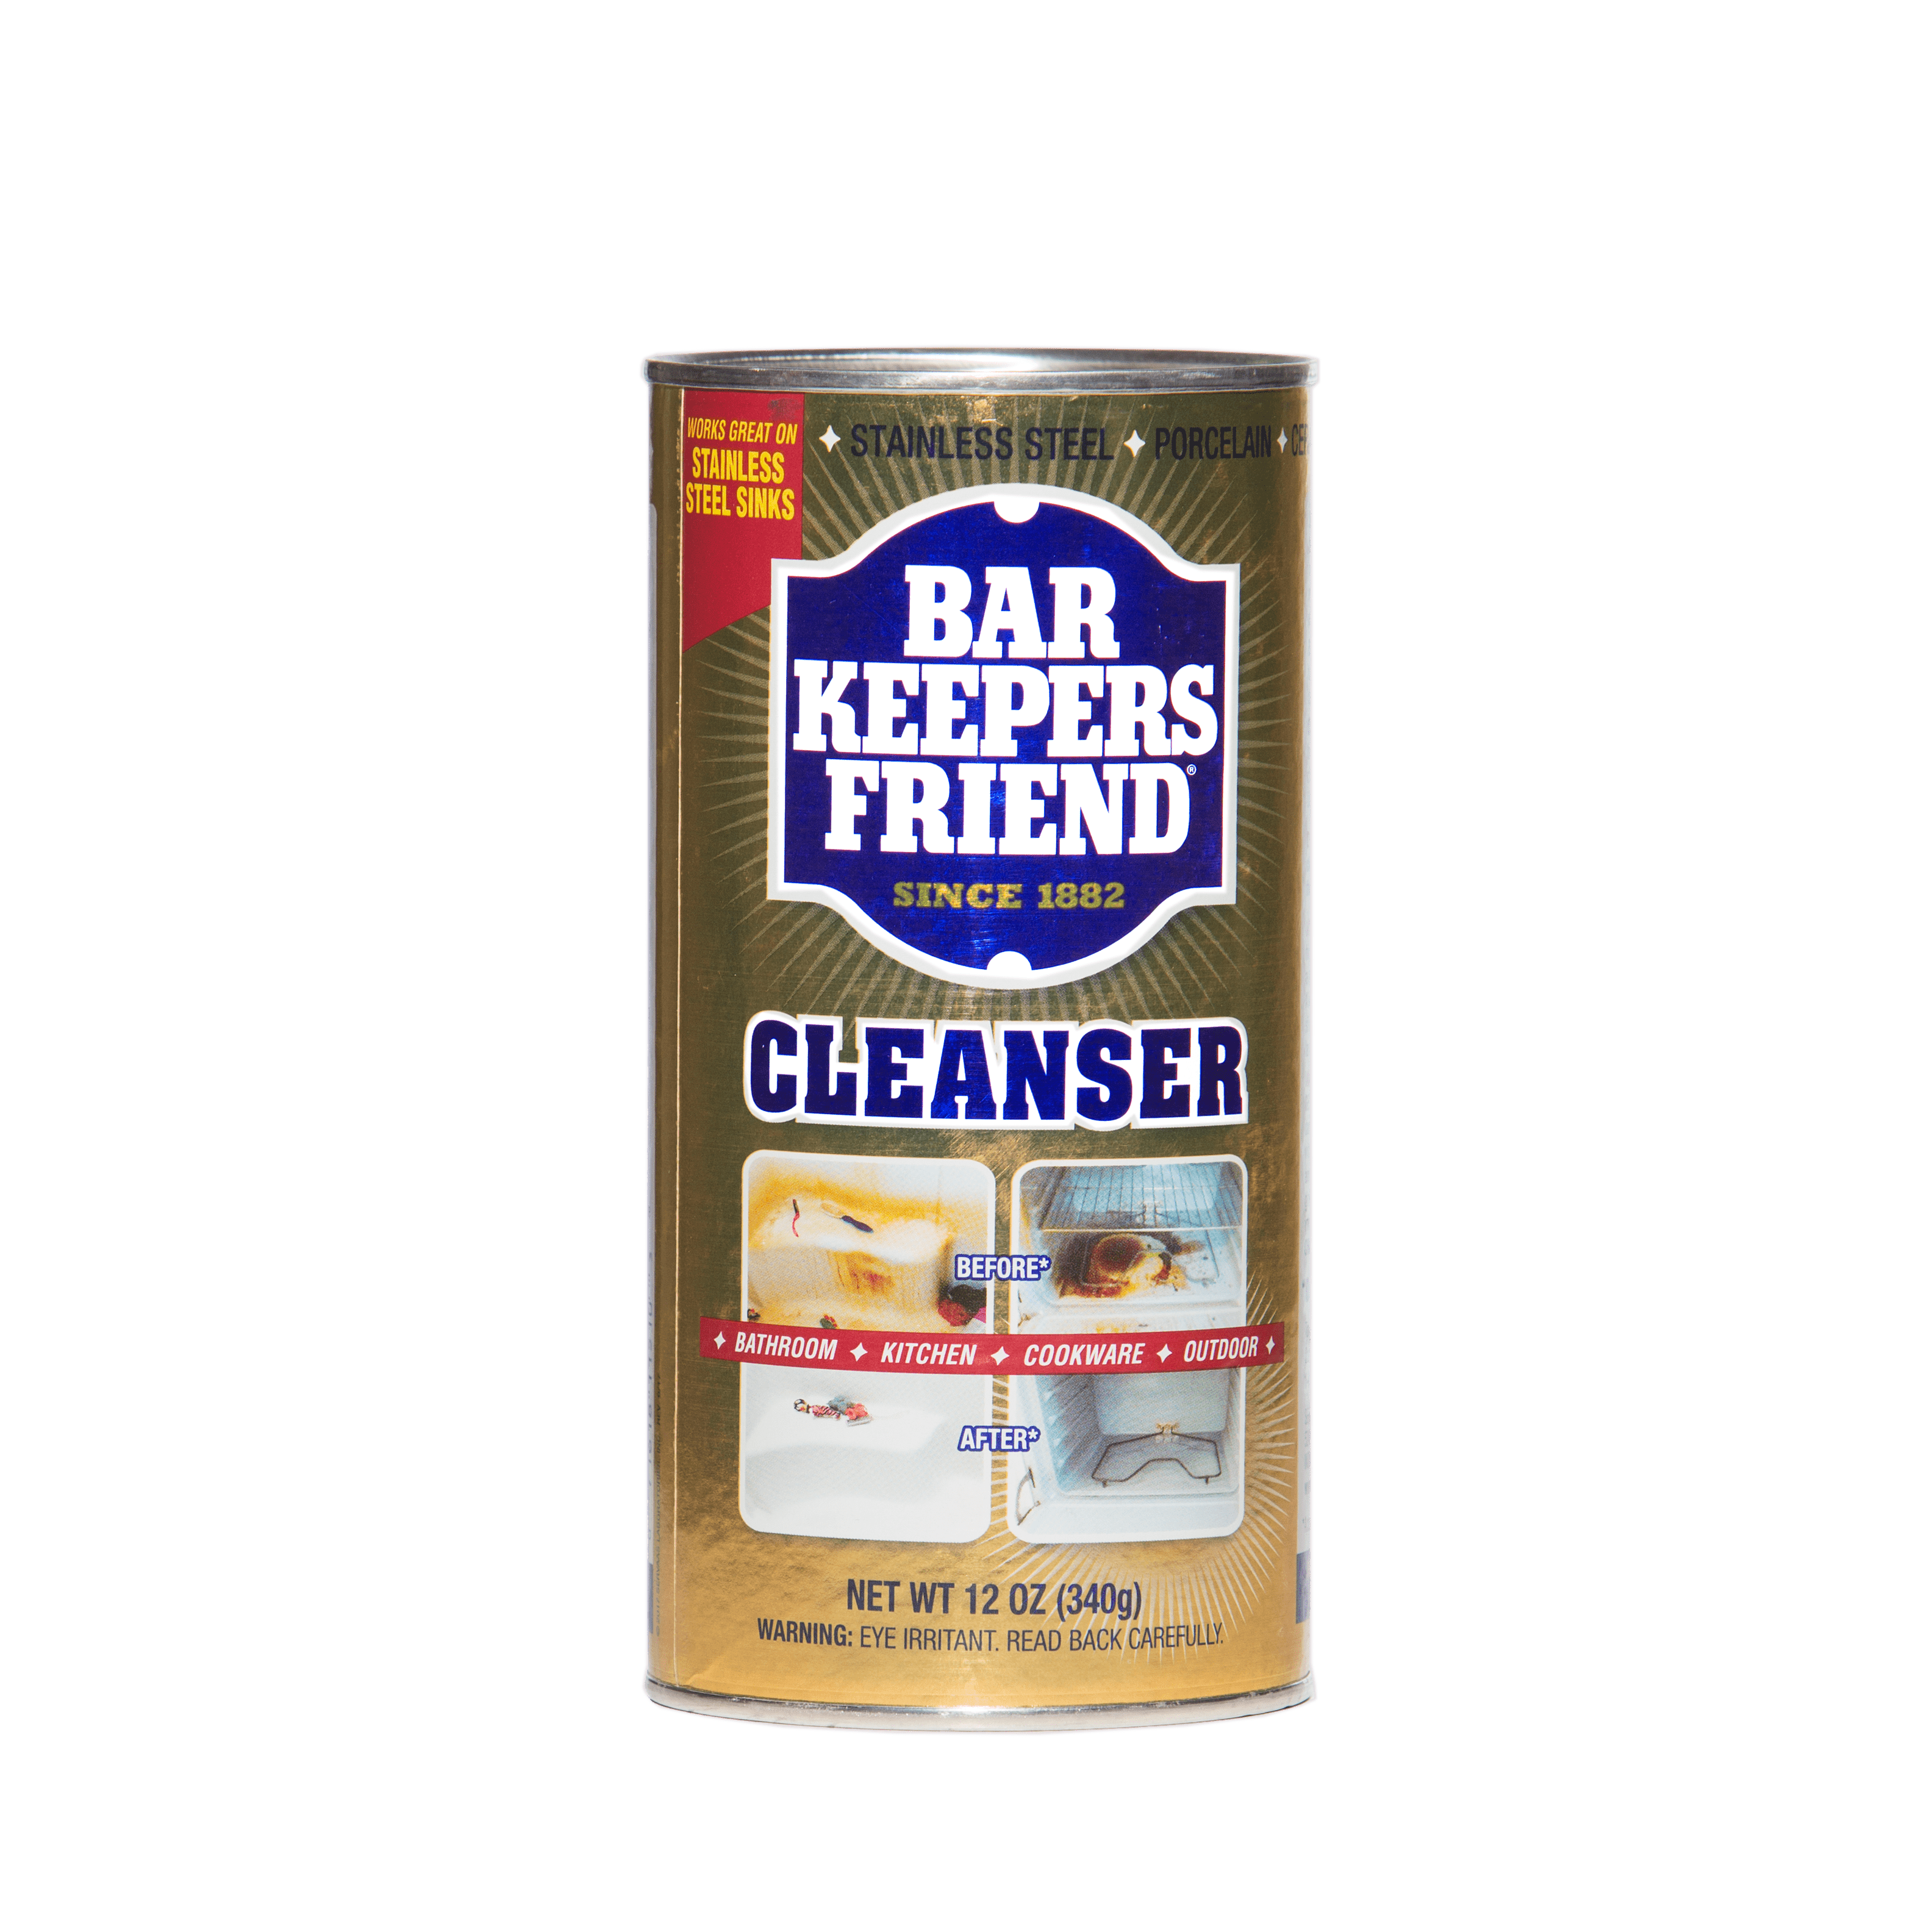 Cleansing powder 425g - Bar Keepers Friend